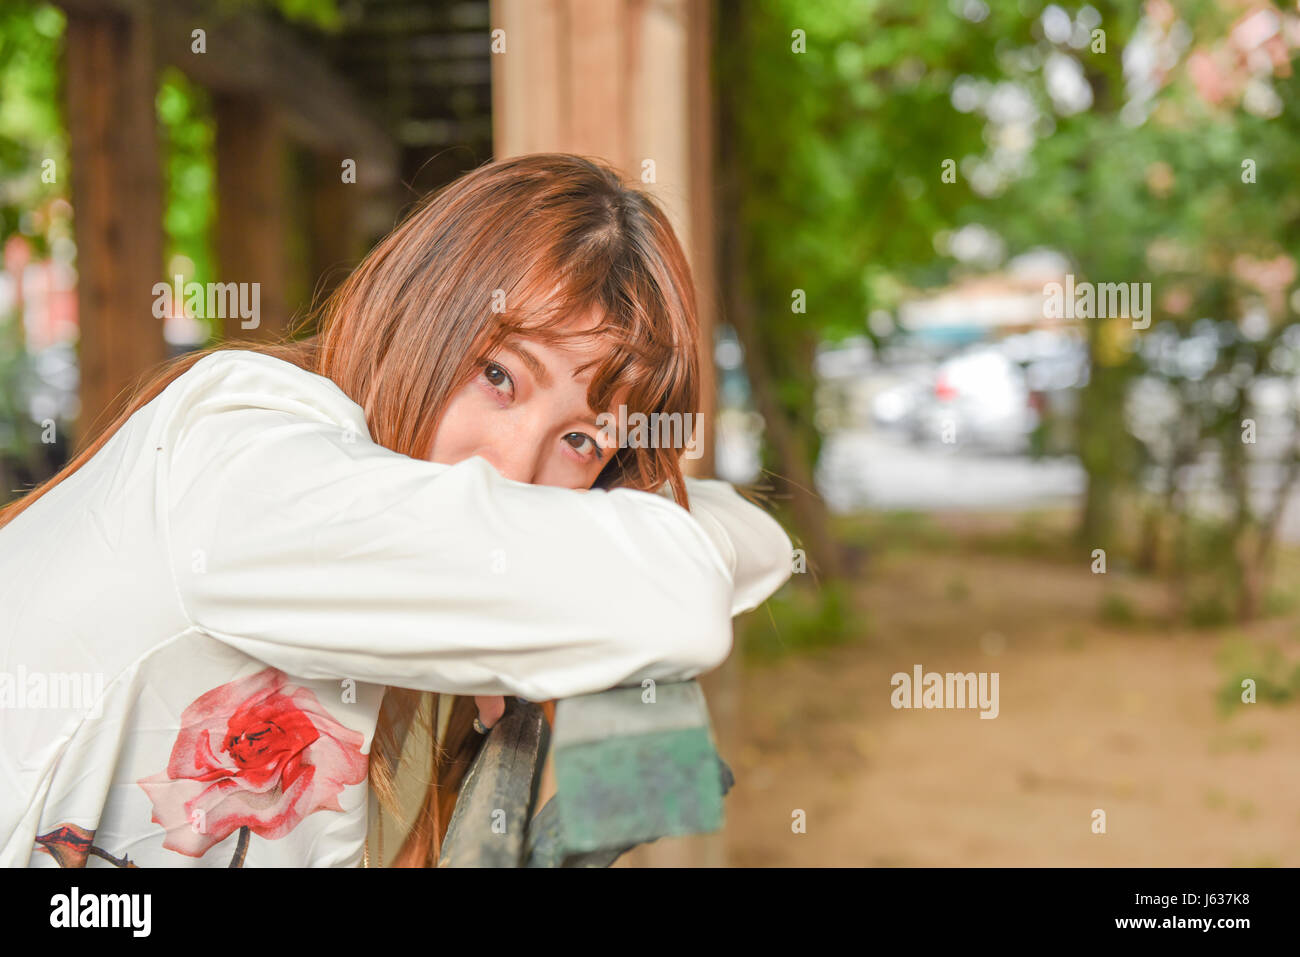 Young Asian woman sitting in chair outdoor et looking at camera Banque D'Images